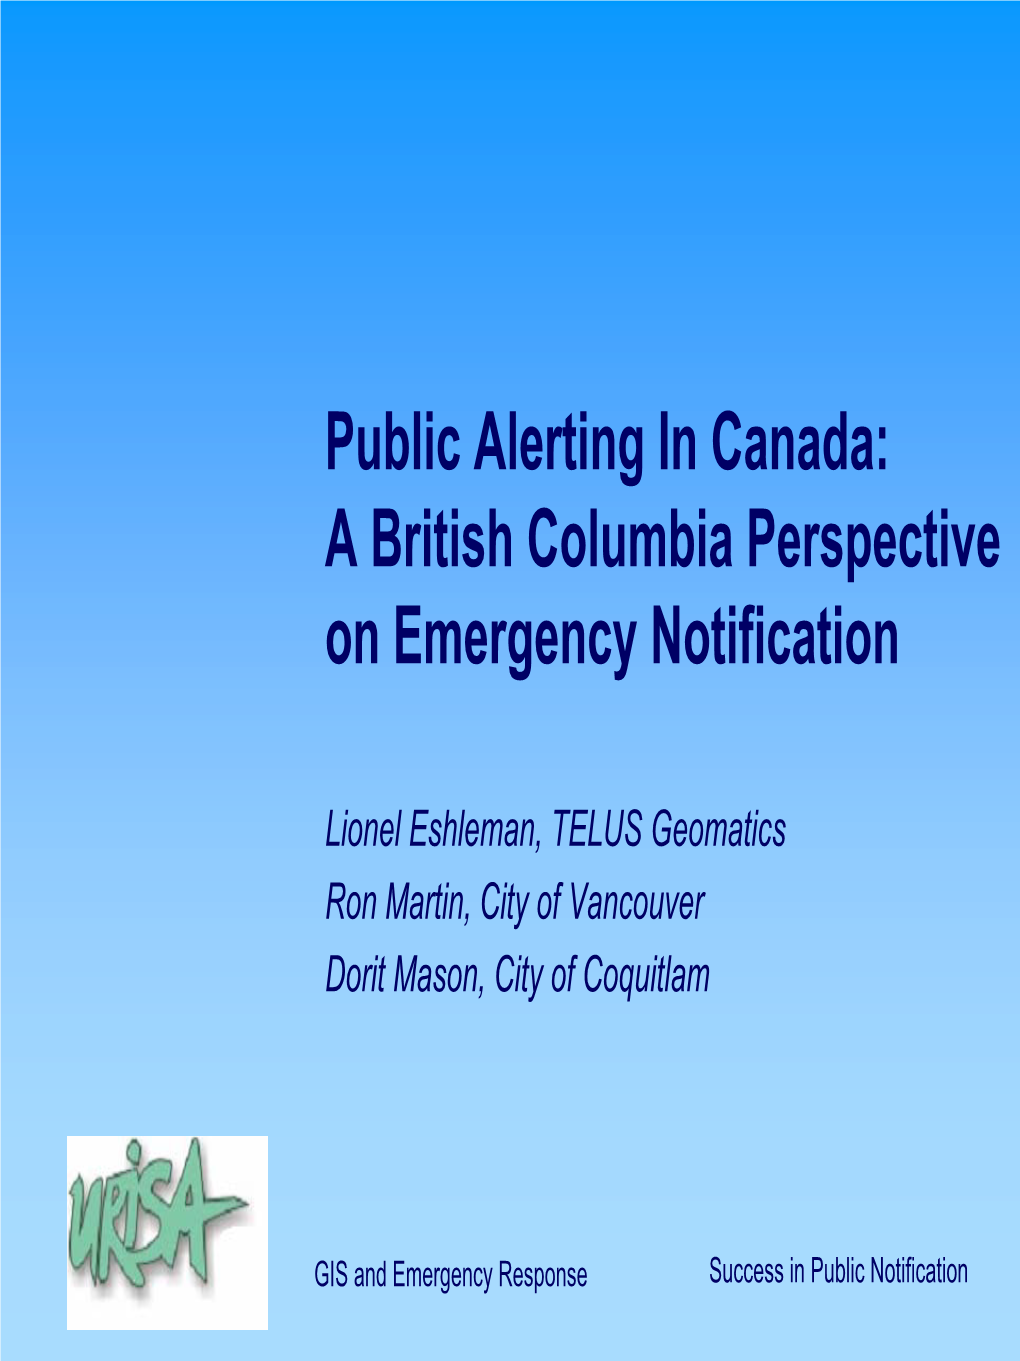 Public Alerting in Canada: a British Columbia Perspective on Emergency Notification